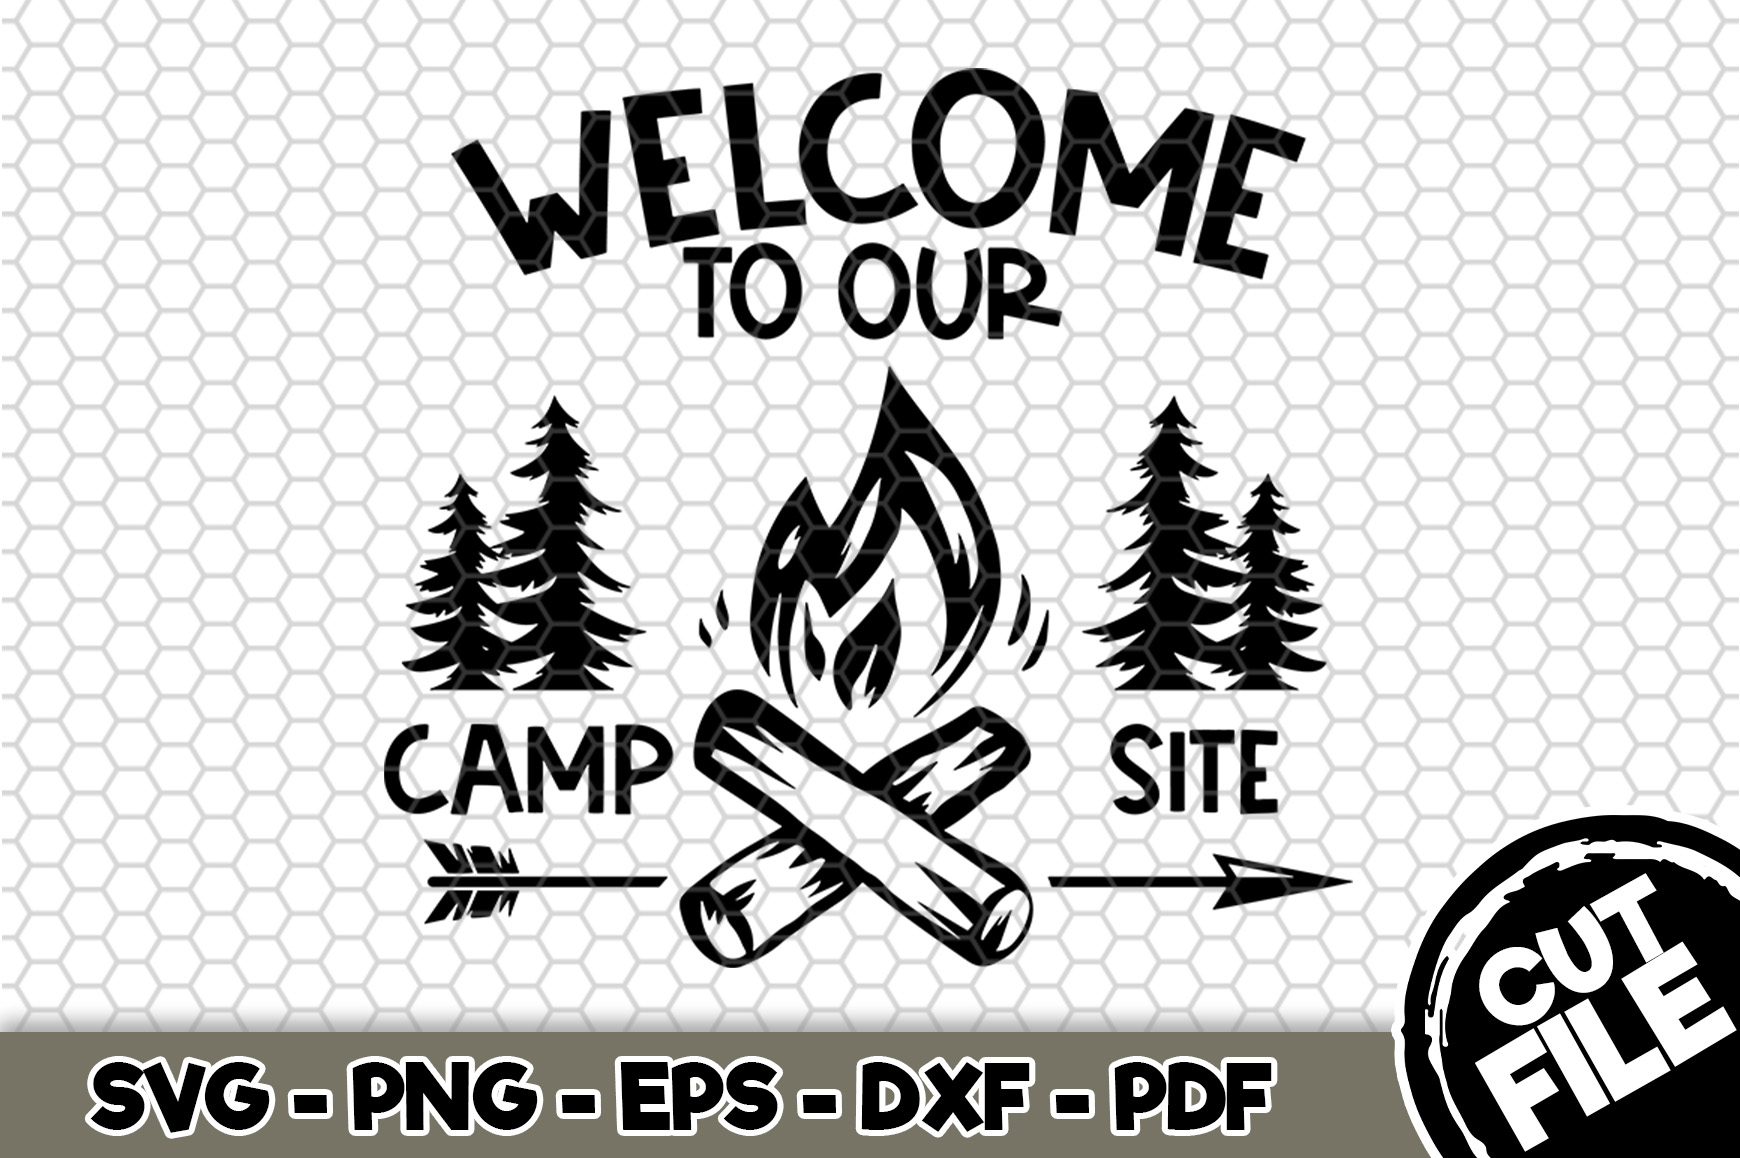 Download Welcome To Our Camp Site - SVG Cut File n263